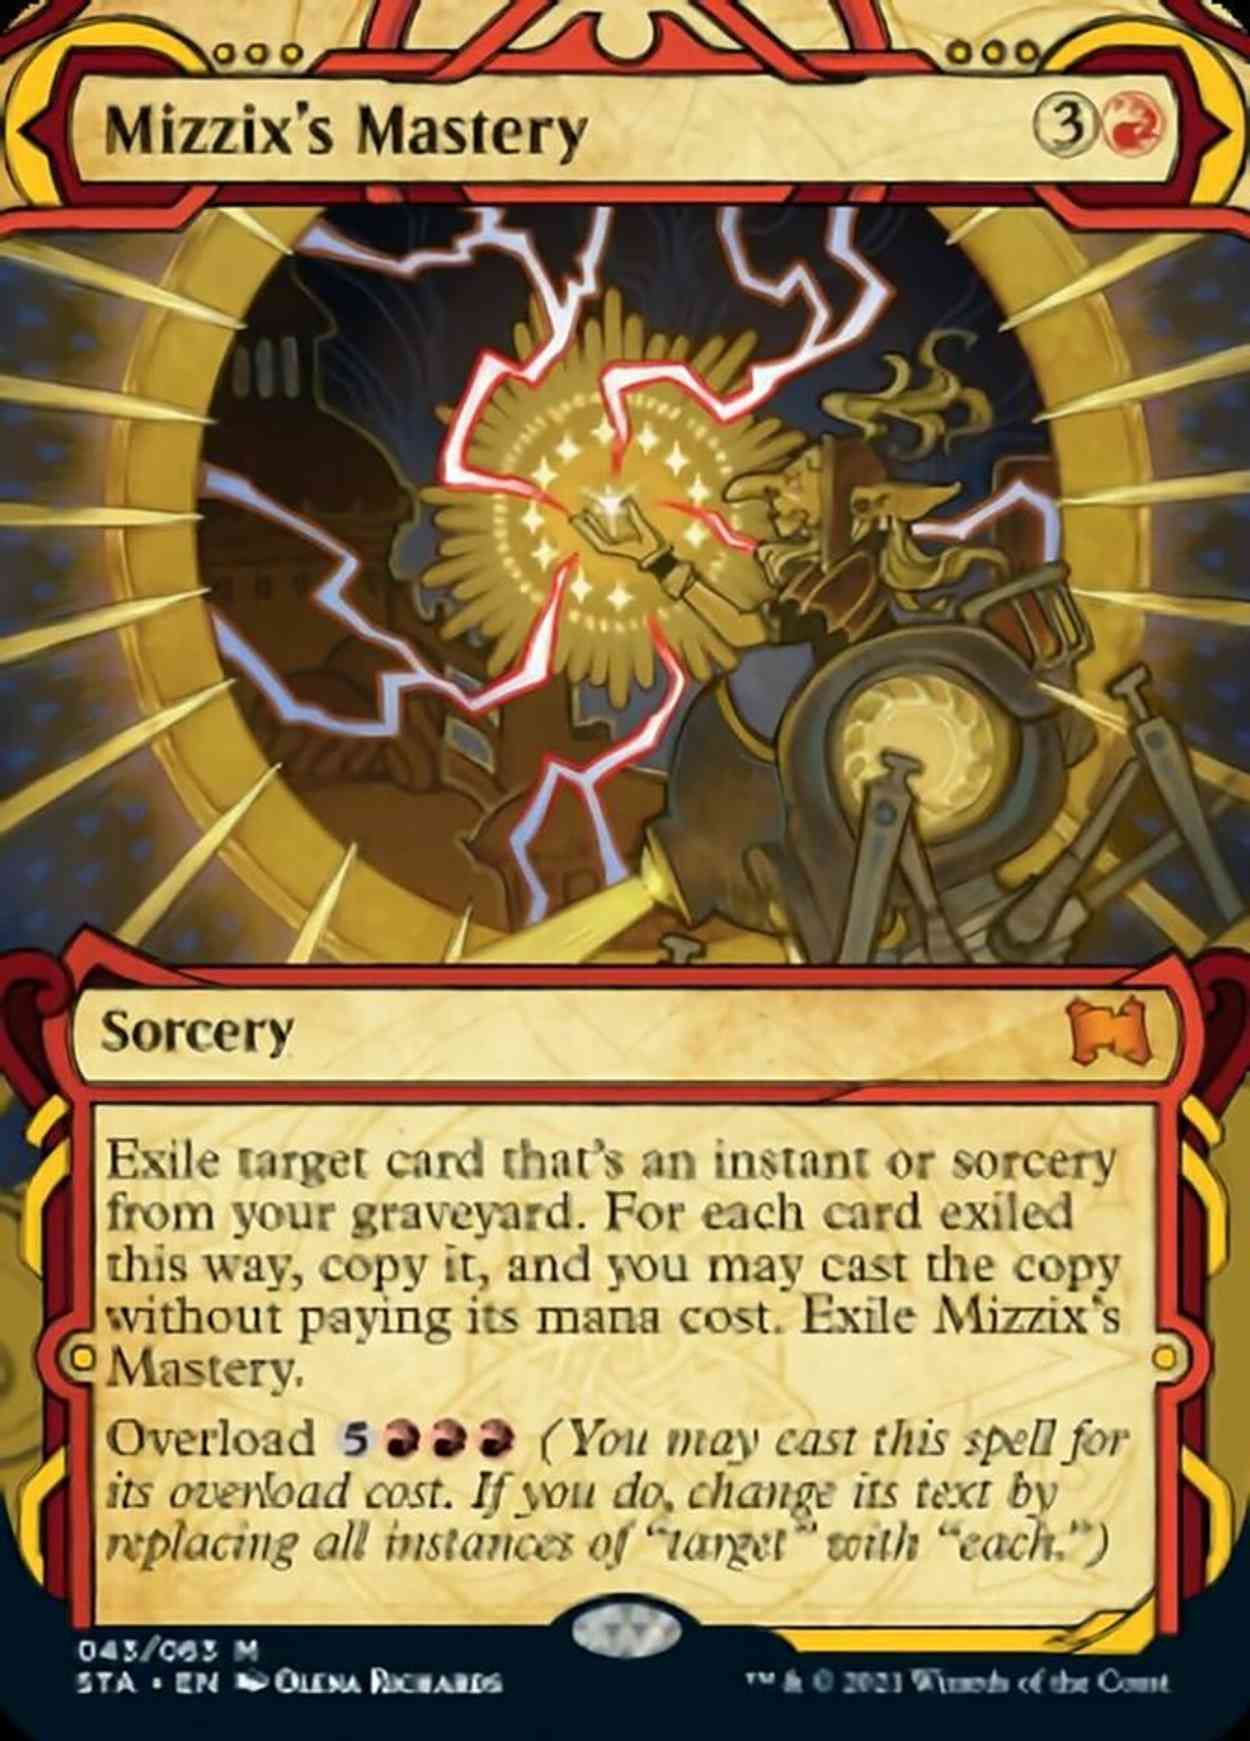 Mizzix's Mastery (Foil Etched) magic card front